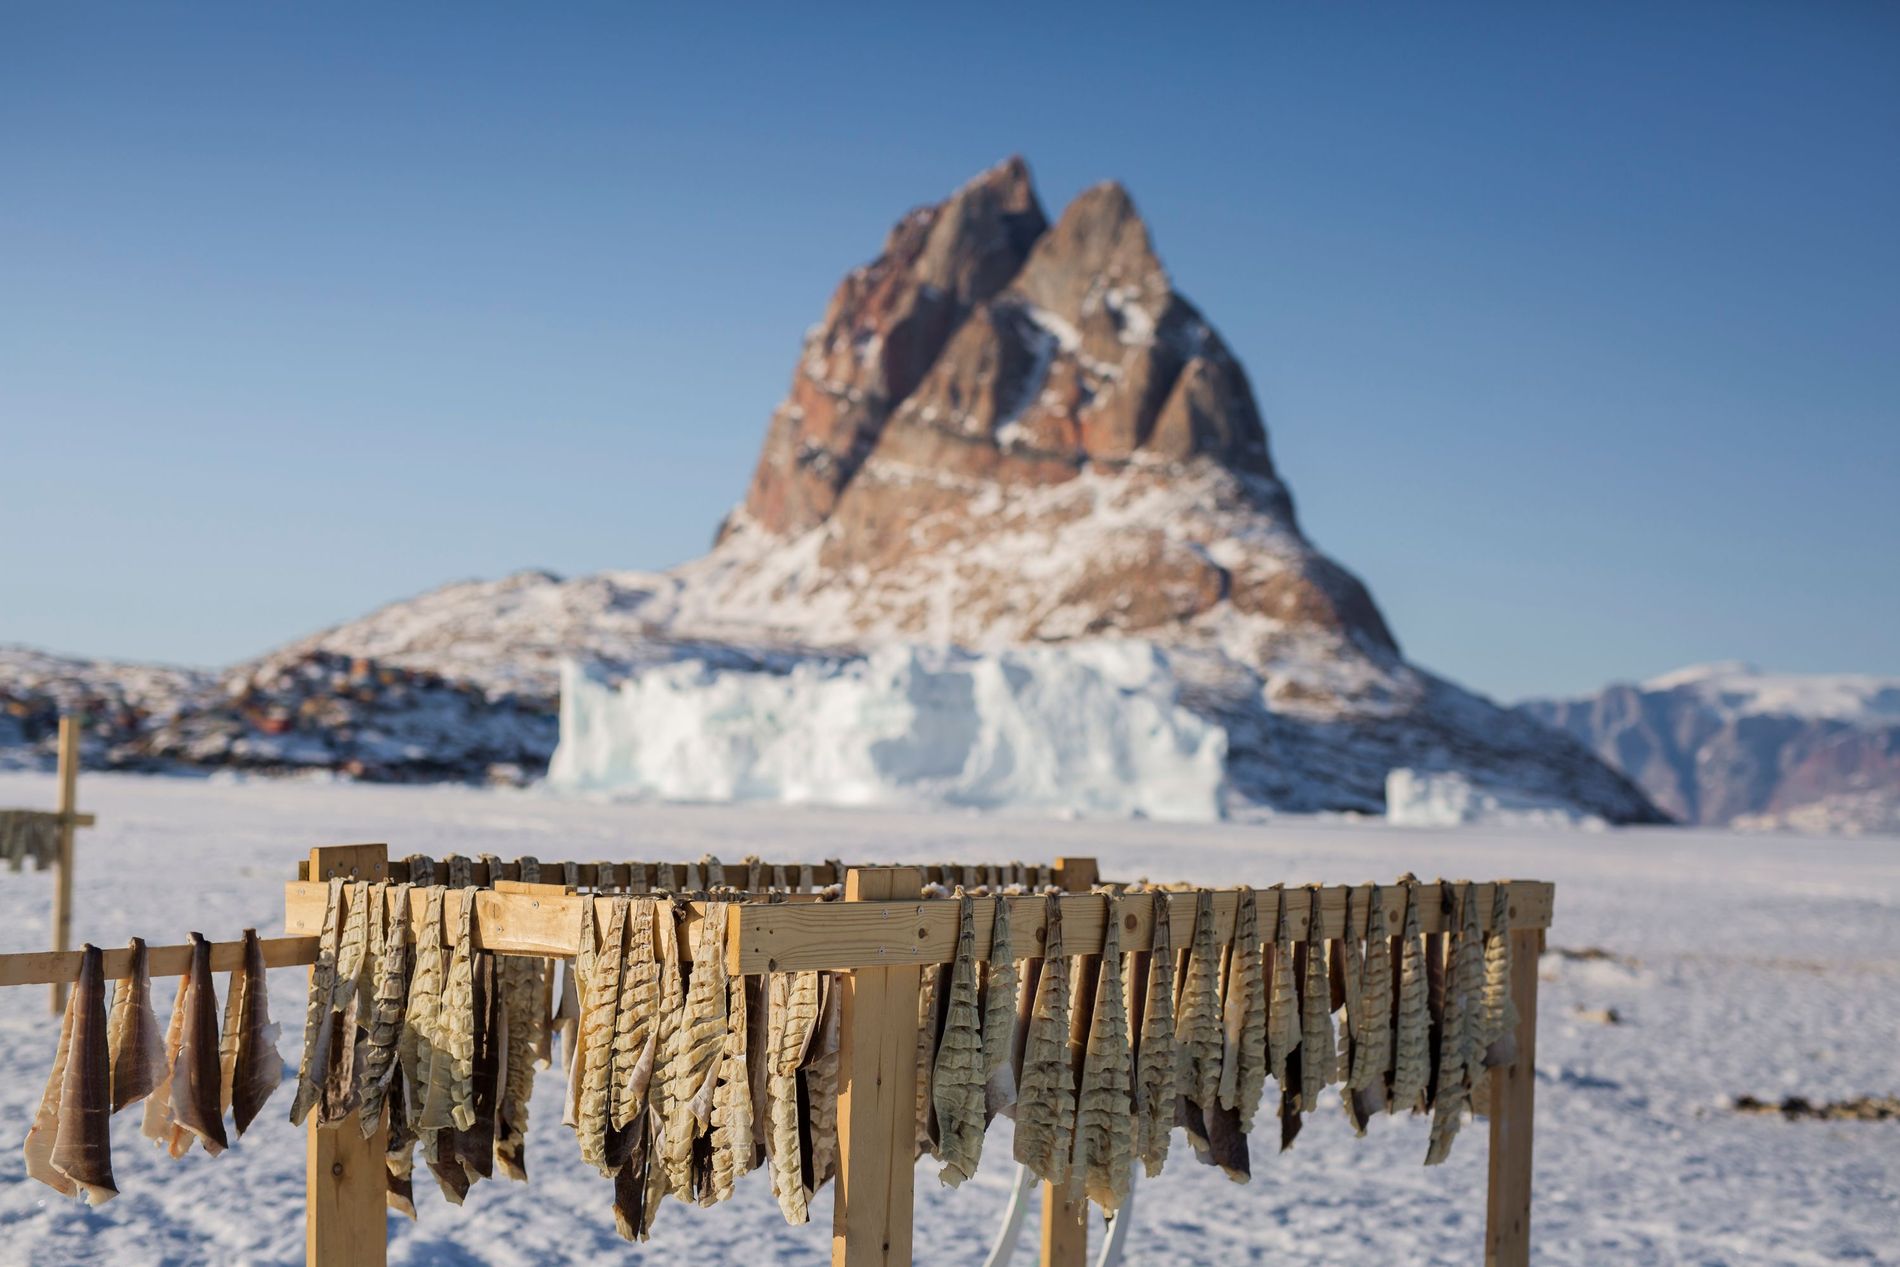 Freshly caught seafood being air-dried in front of a snowy mountain peak in Greenland